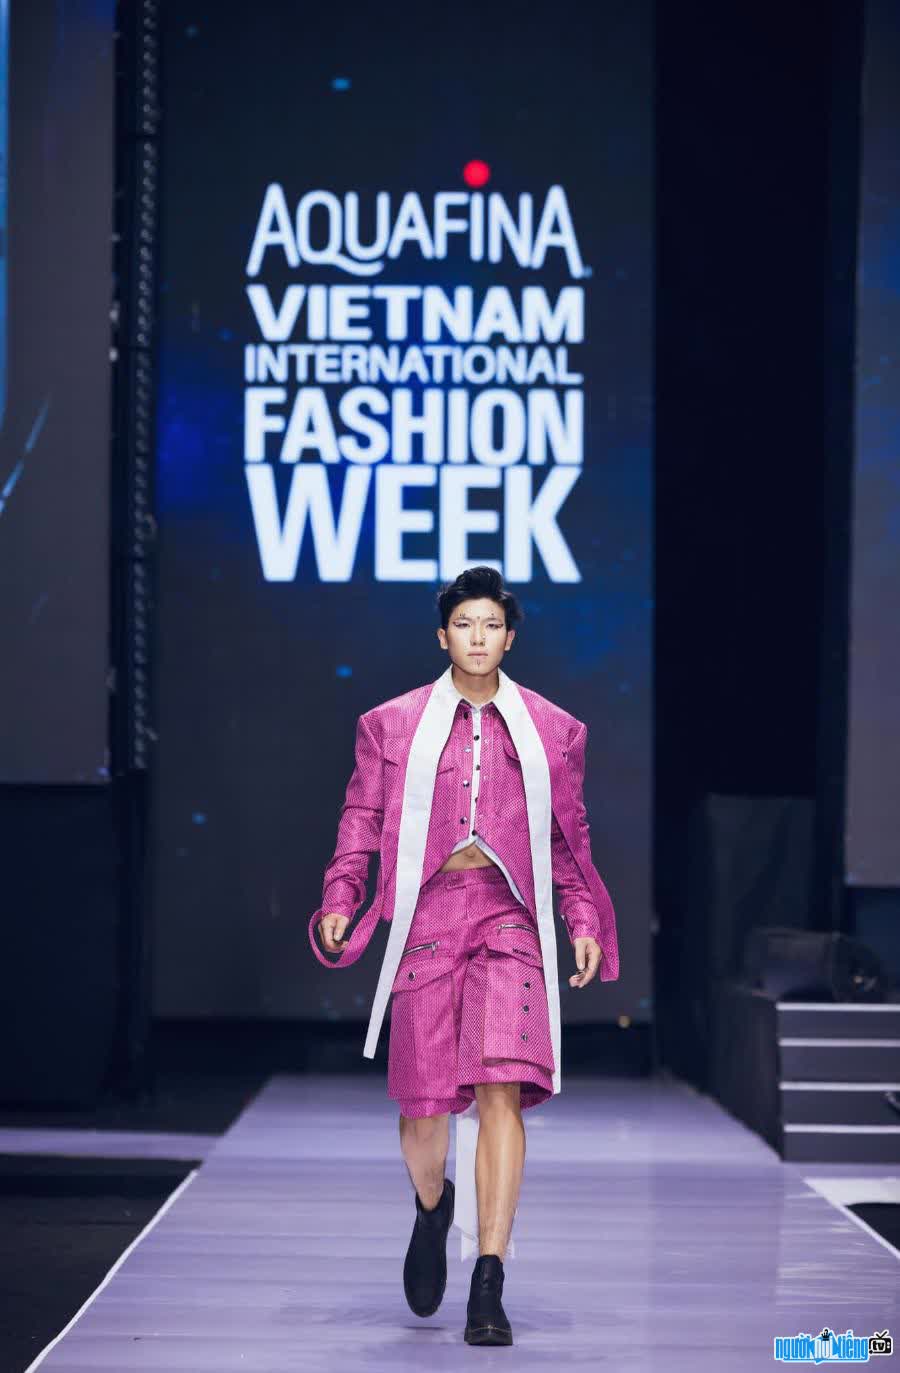 Nguyen Hoang Tung on the catwalk